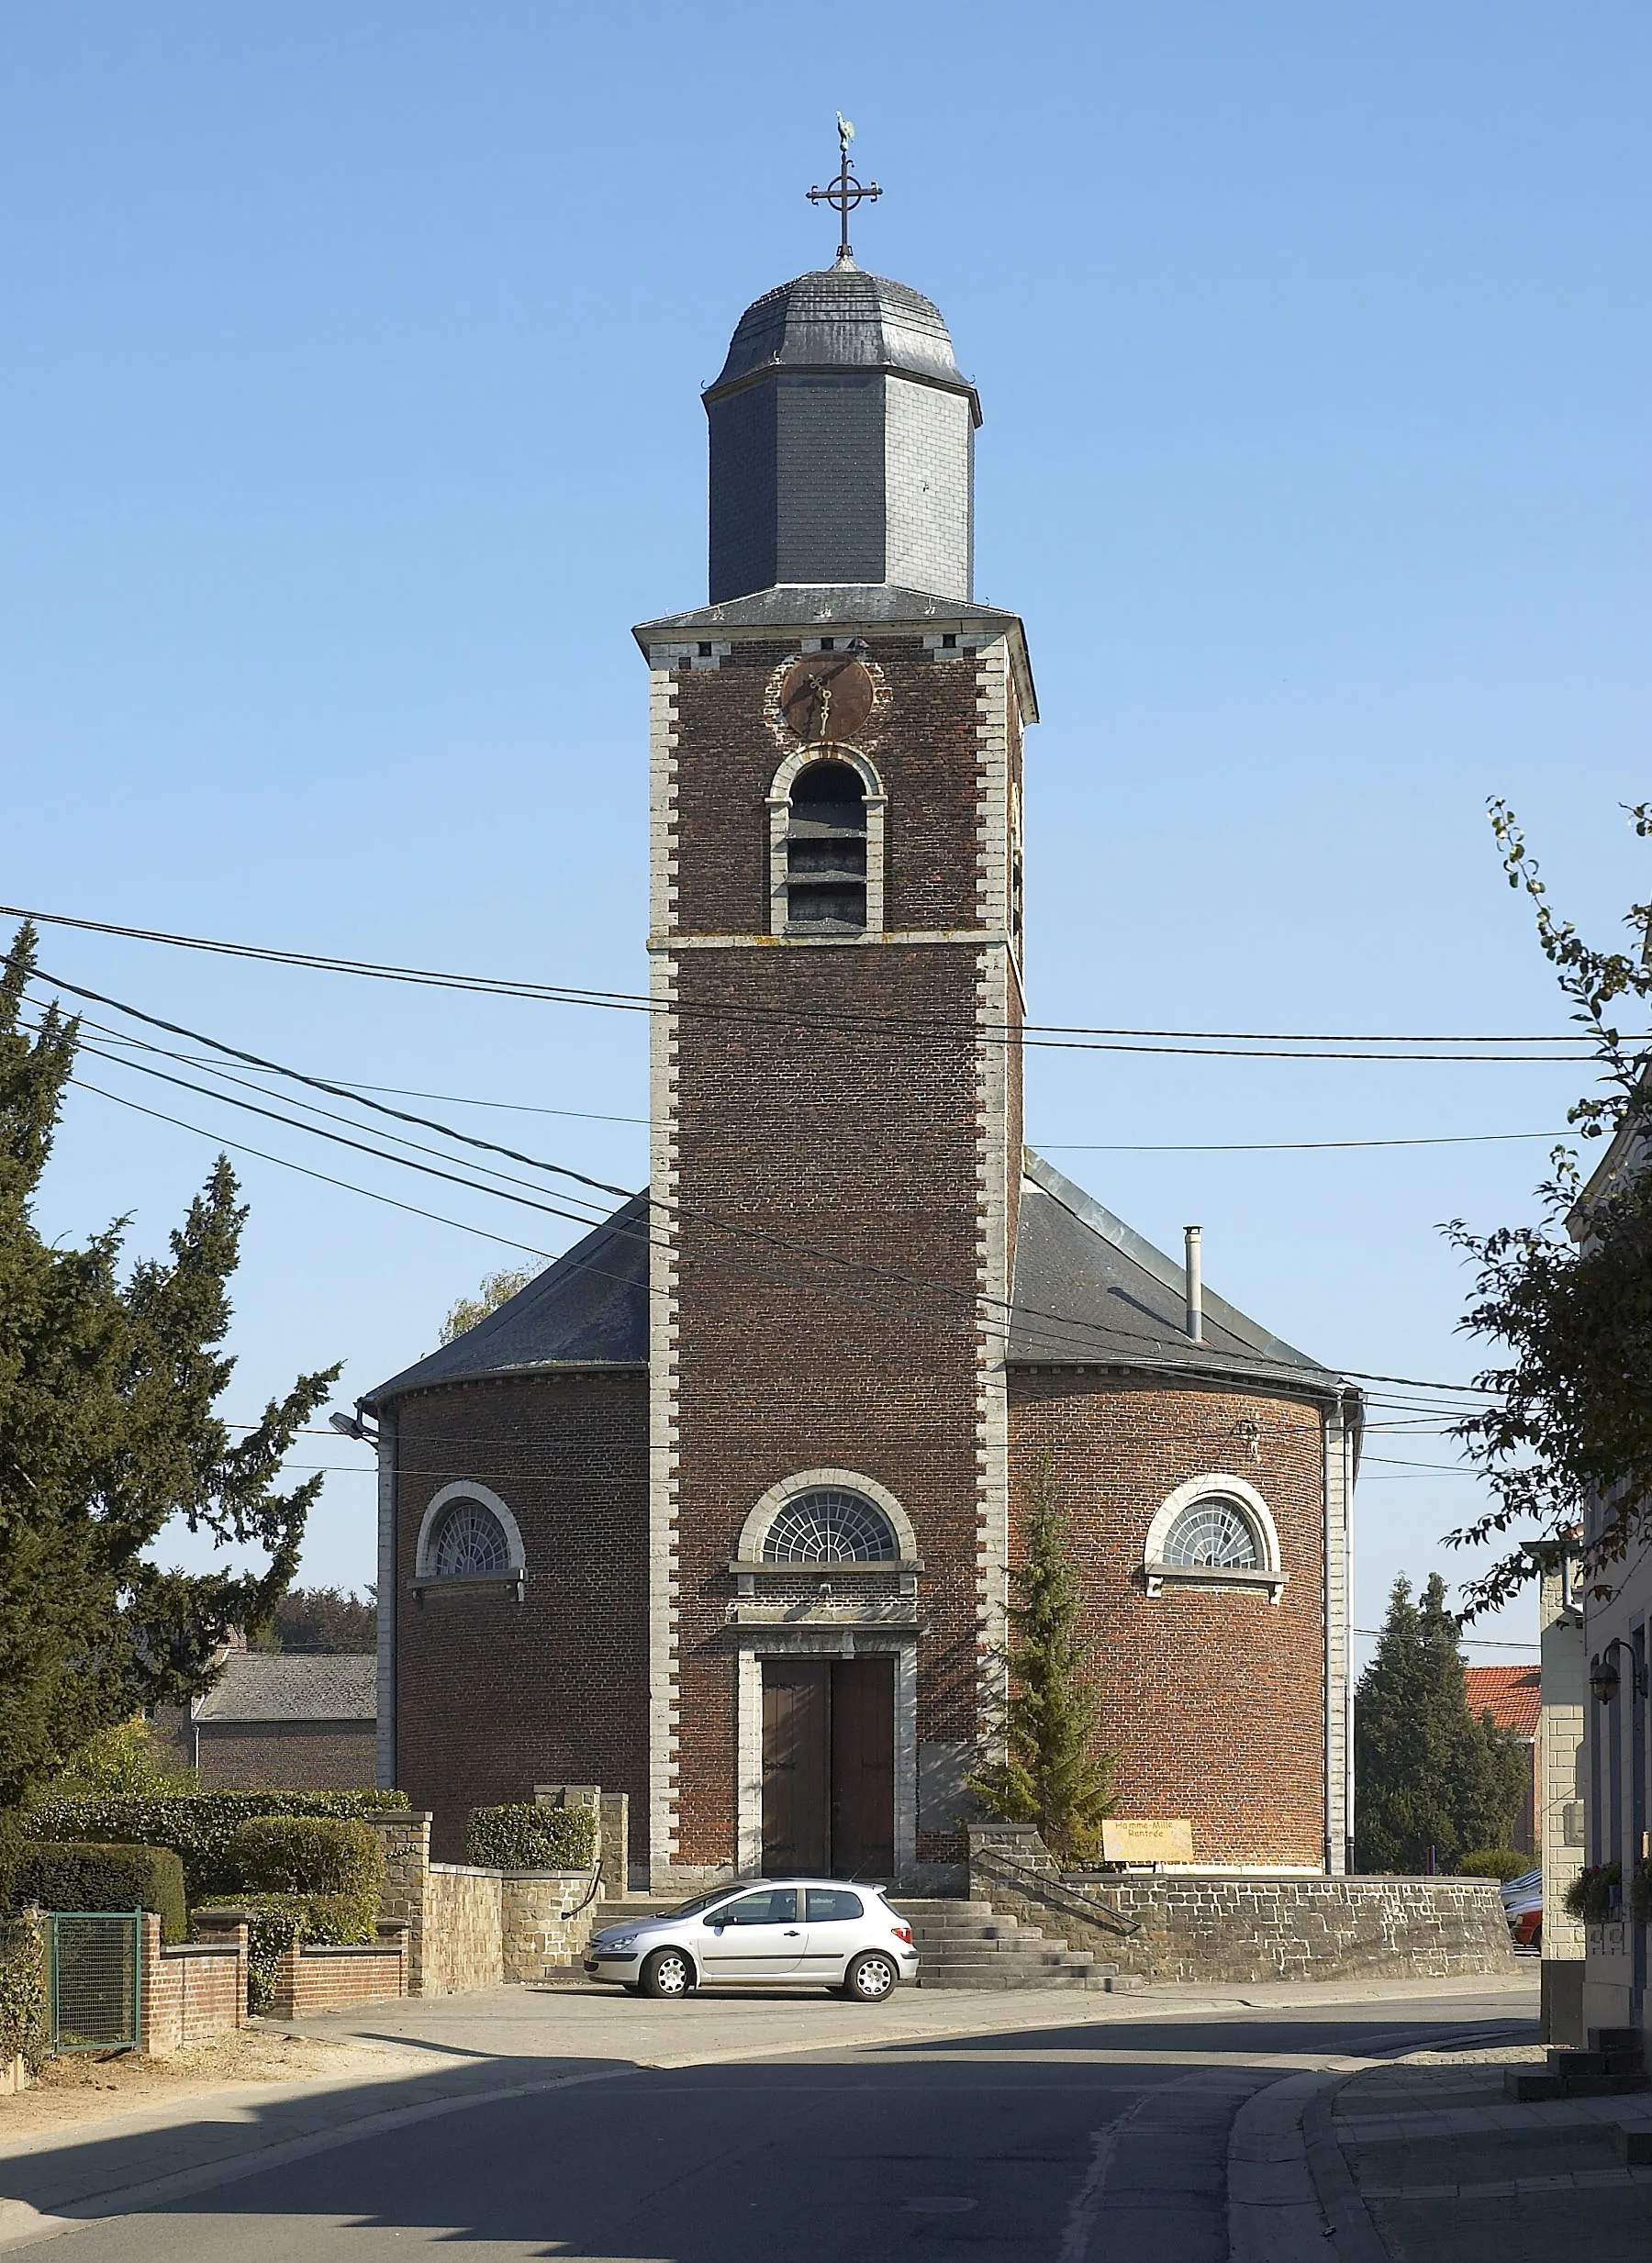 Photo showing: the St. Amand church in Hamme-Mille, Belgium